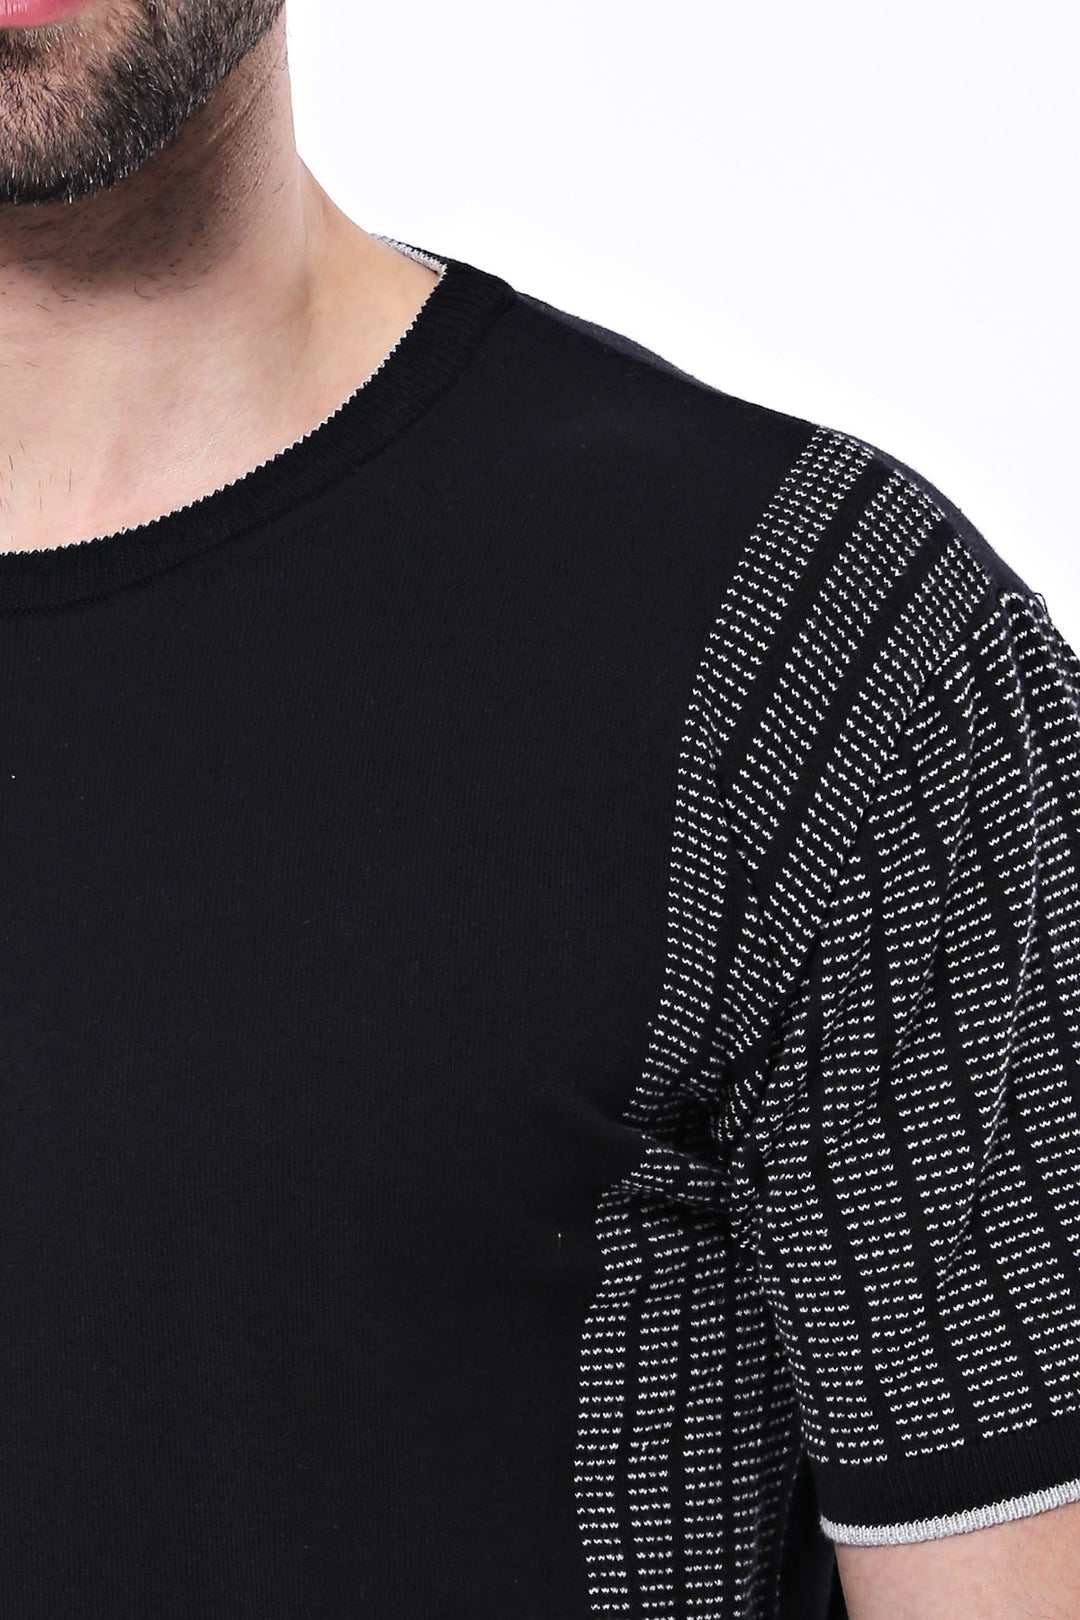 Circle Neck Patterned Black Knitted T-Shirt - Wessi